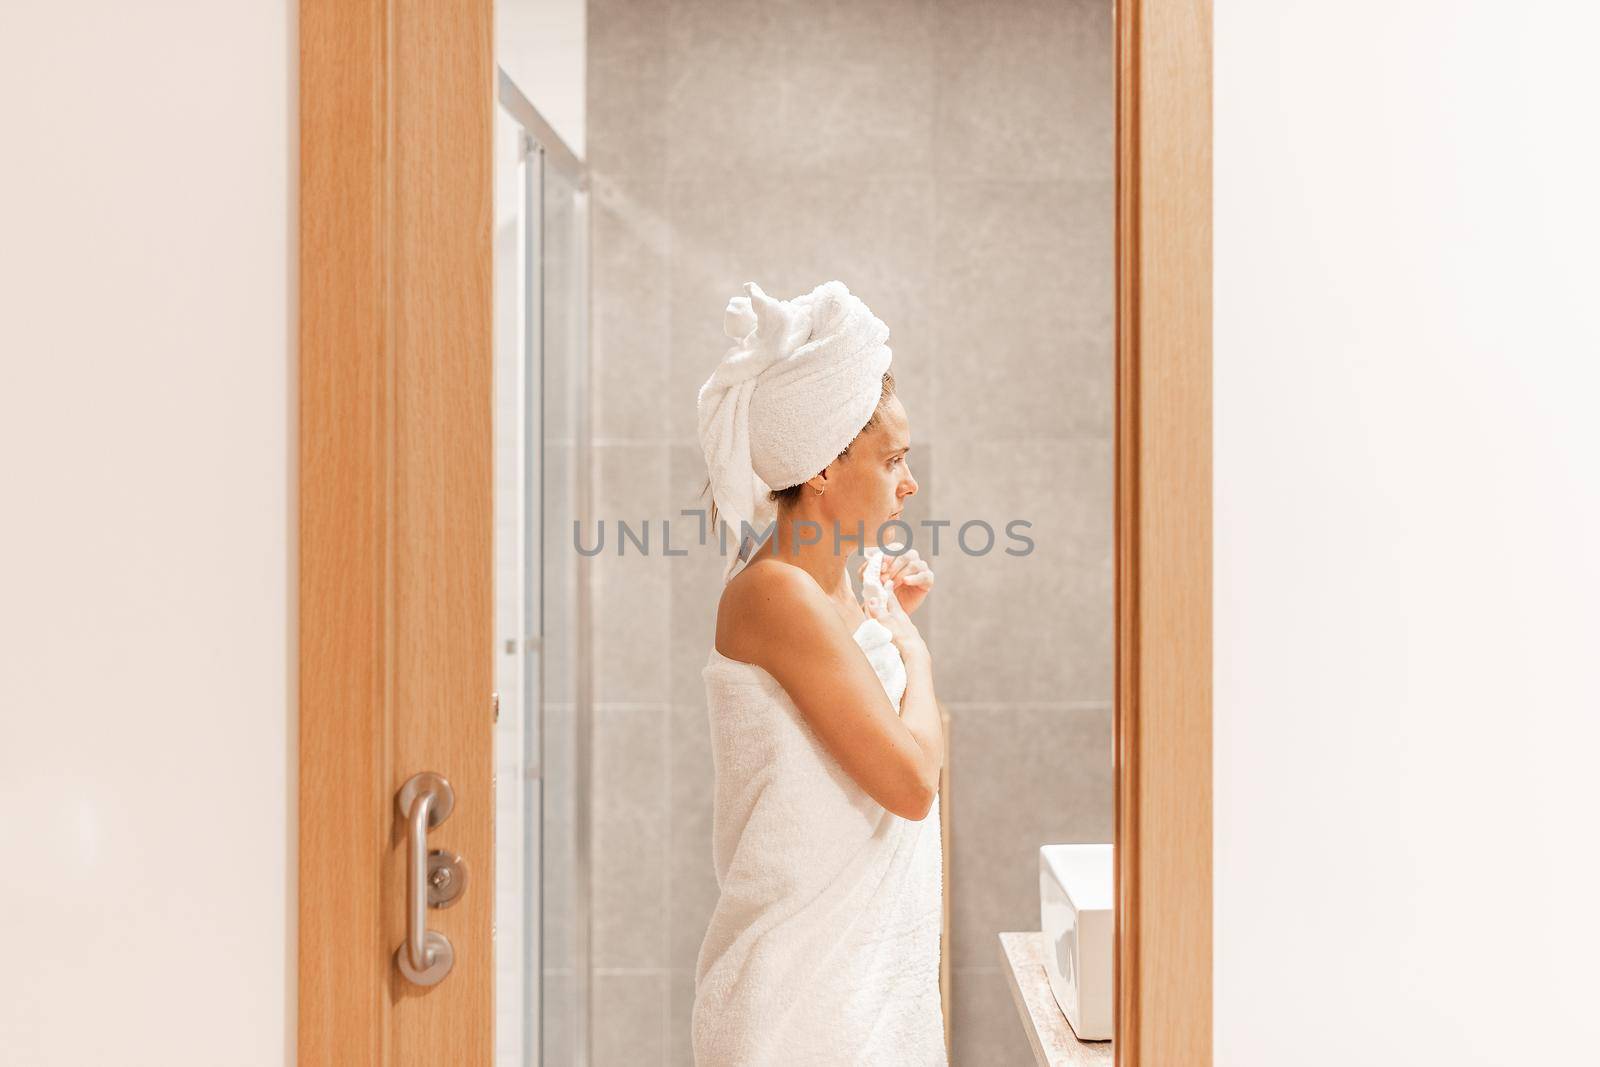 Side view of a caucasian adult woman wrapped with towels after taking shower while looking in the mirror in a hotel bathroom. Concept of hotel.